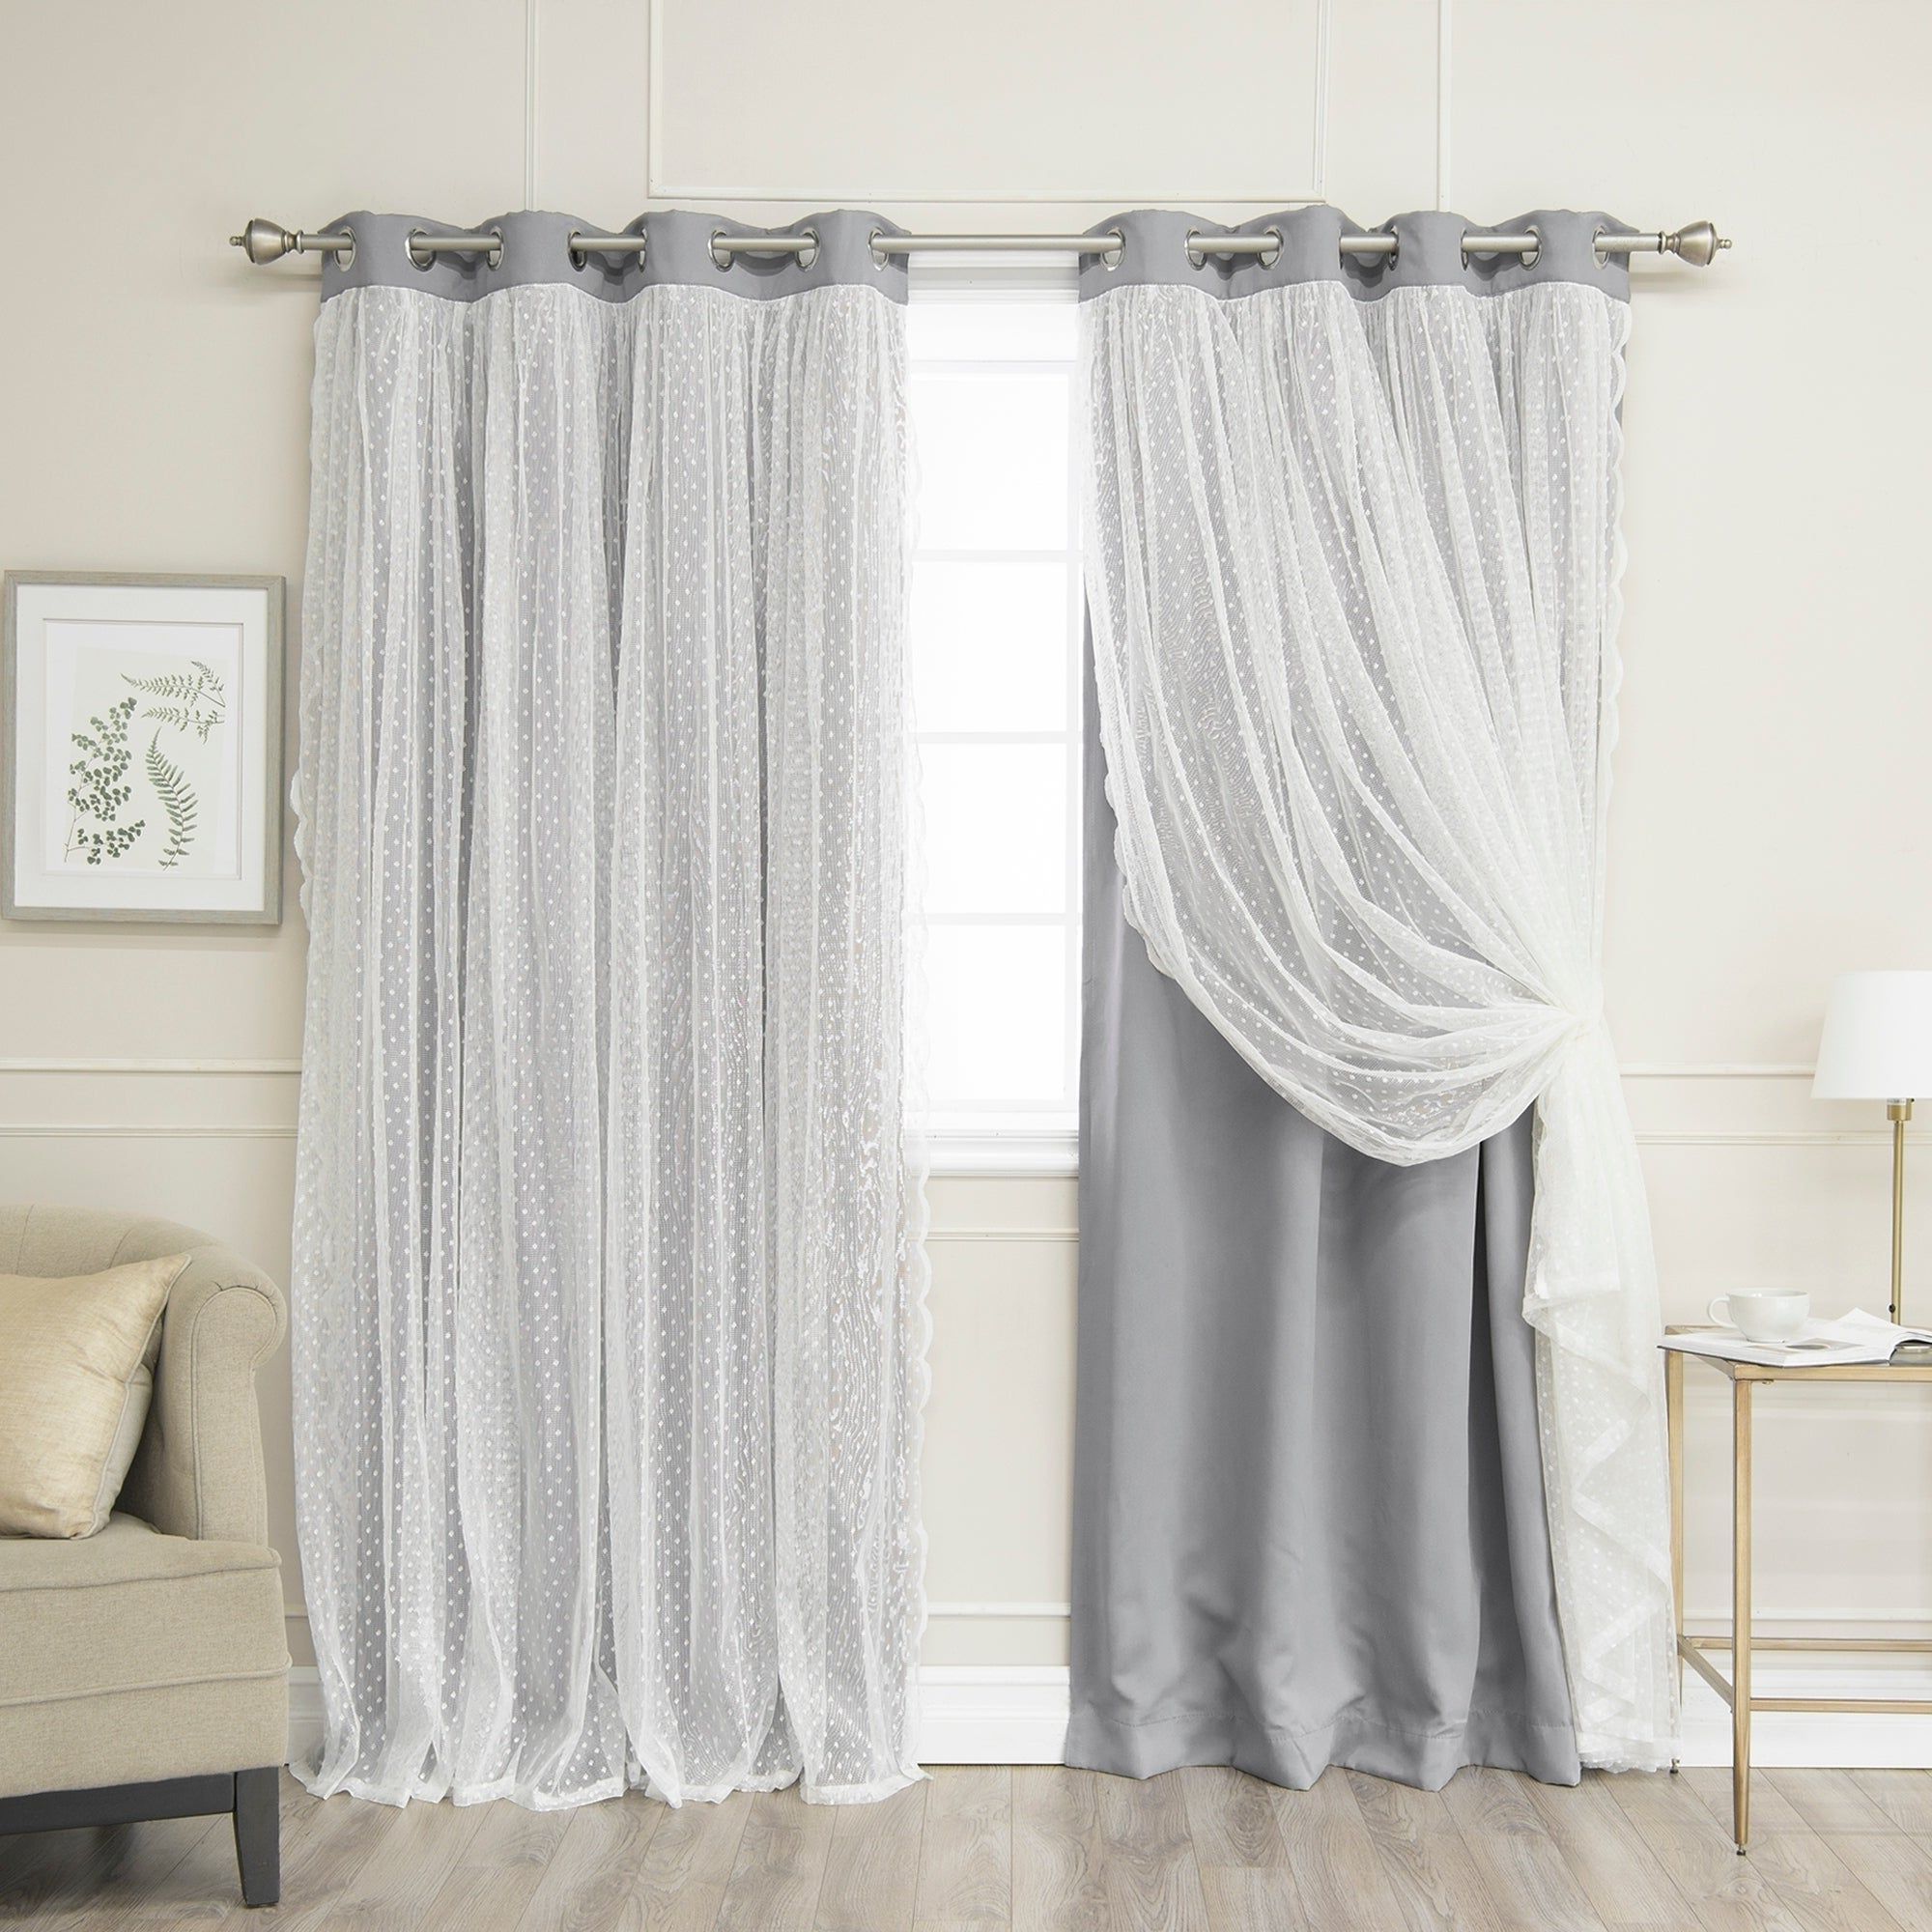 Most Recent Bethany Sheer Overlay Blackout Window Curtains Regarding Aurora Home Dotted Lace Overlay Blackout Curtain Panel Pair (View 13 of 20)